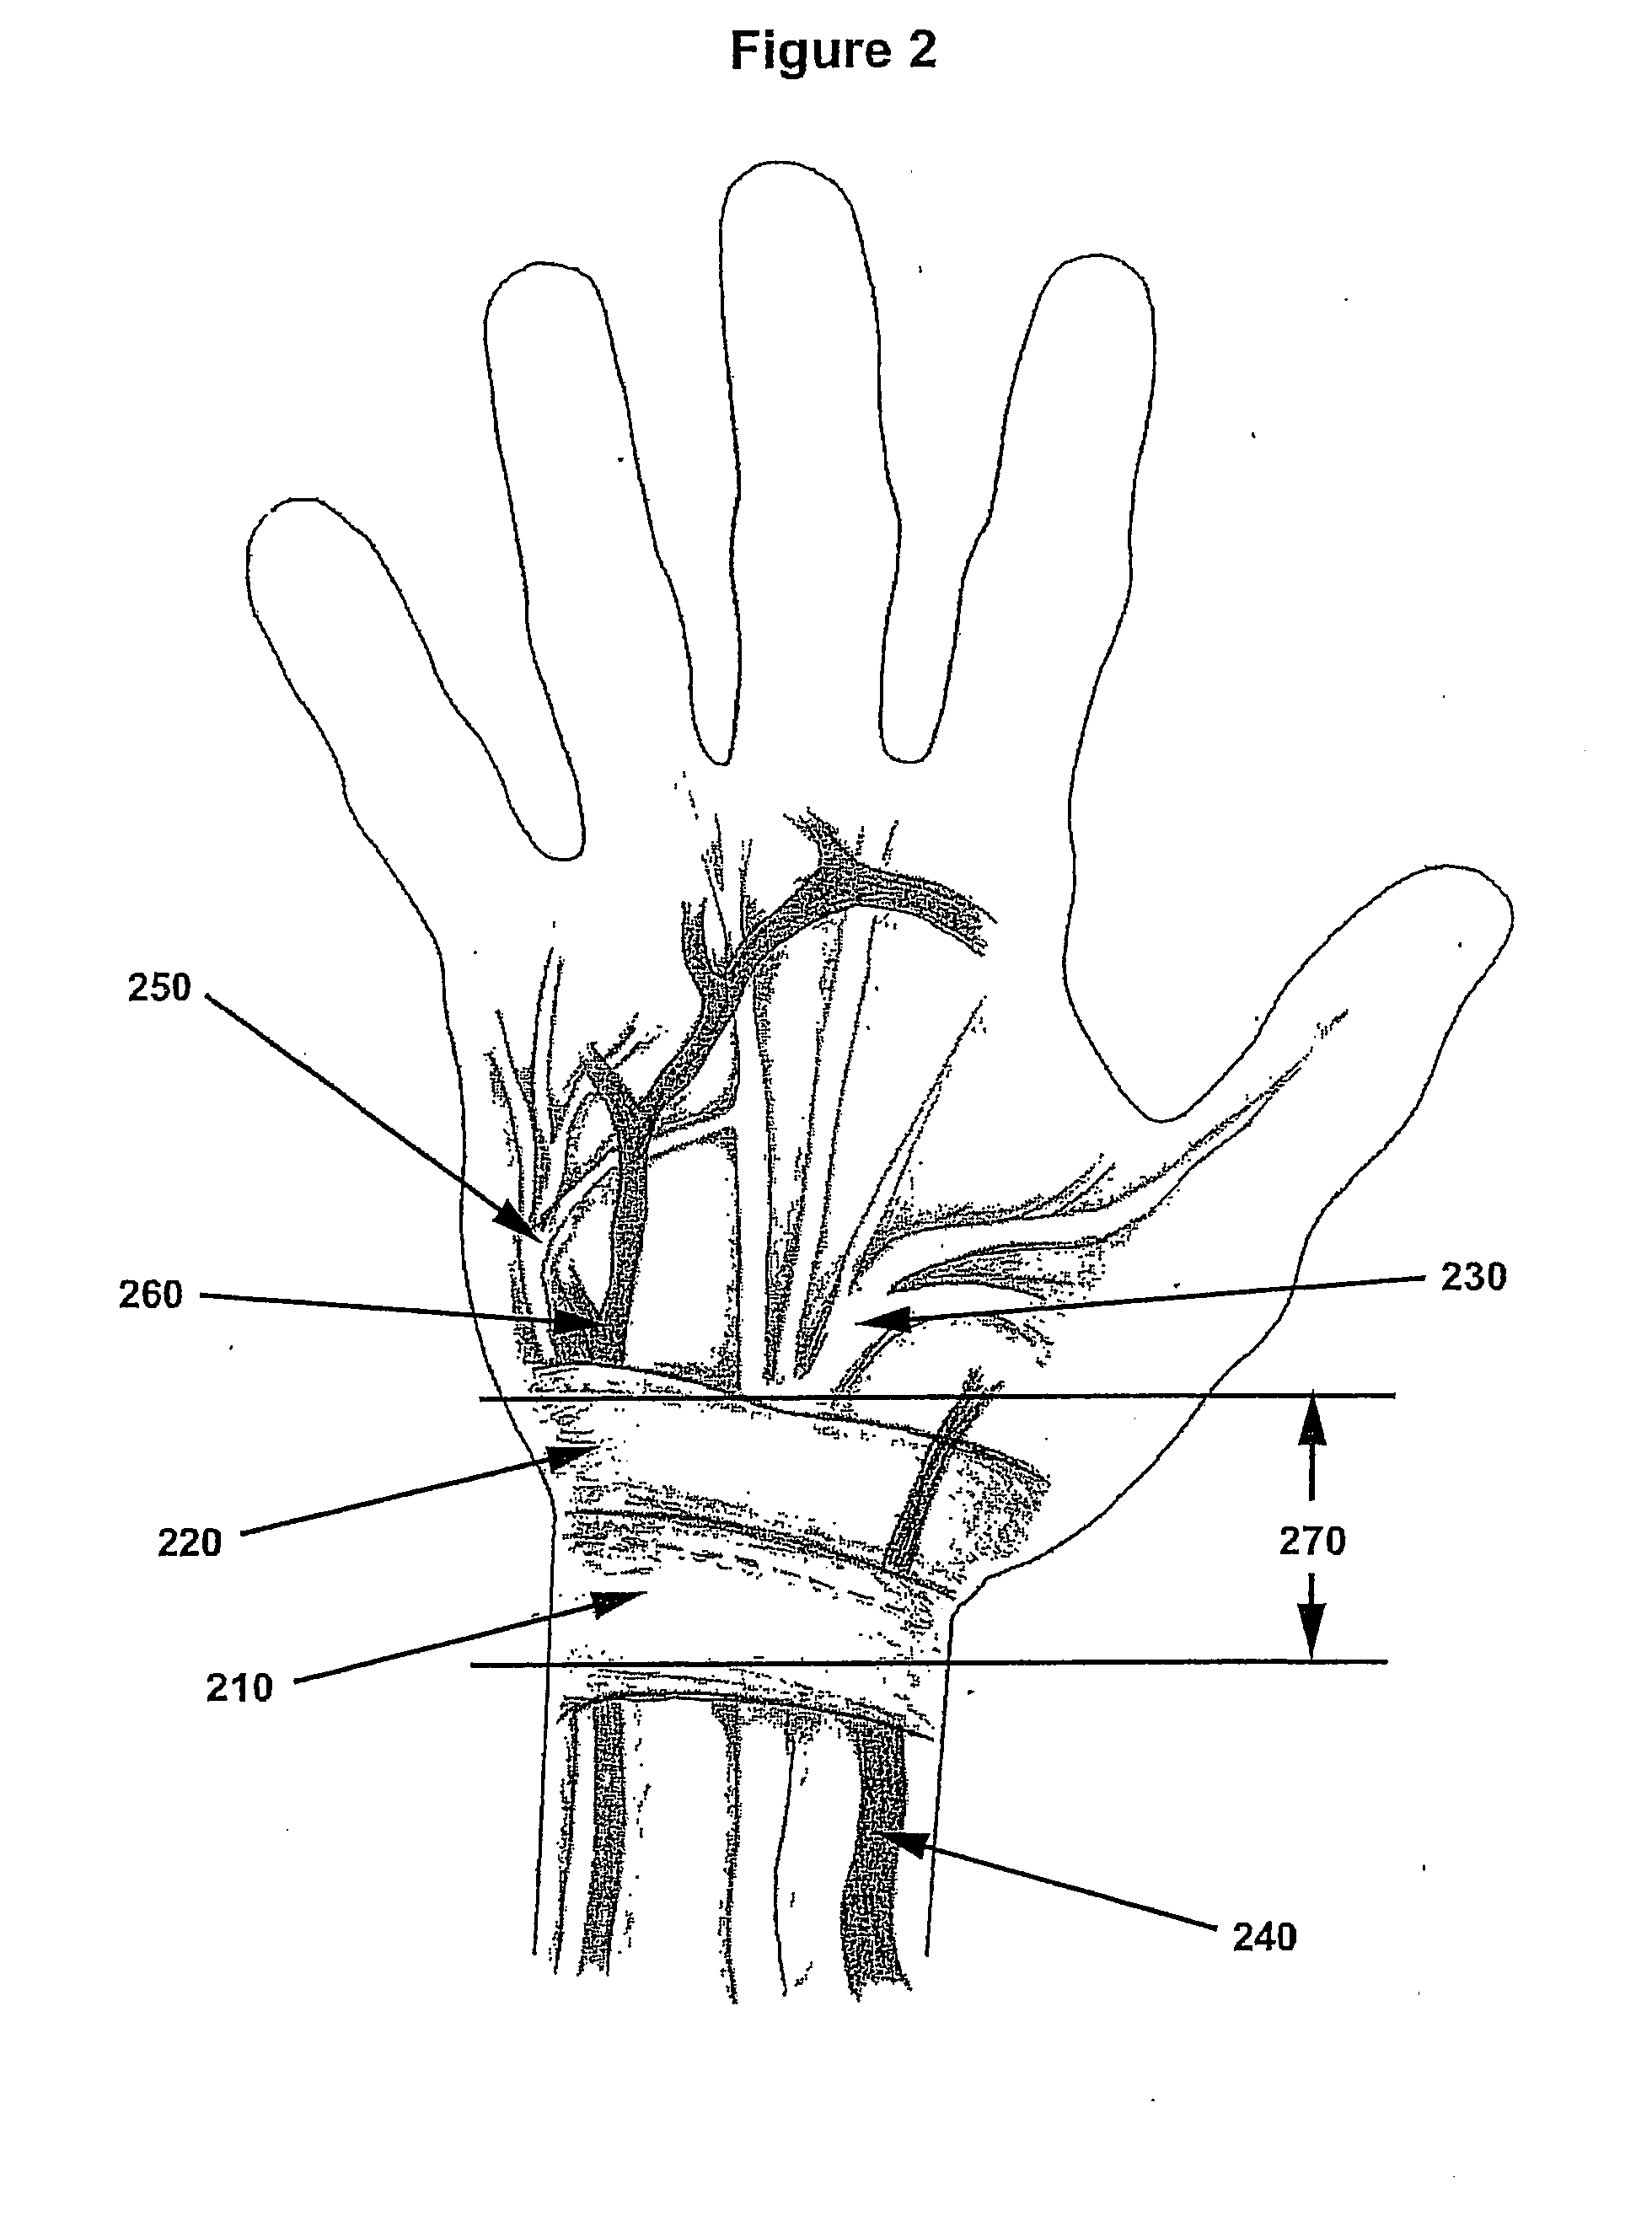 System and method for simultaneously applying a plurality of therapeutic modalities to treat carpal tunnel syndrome